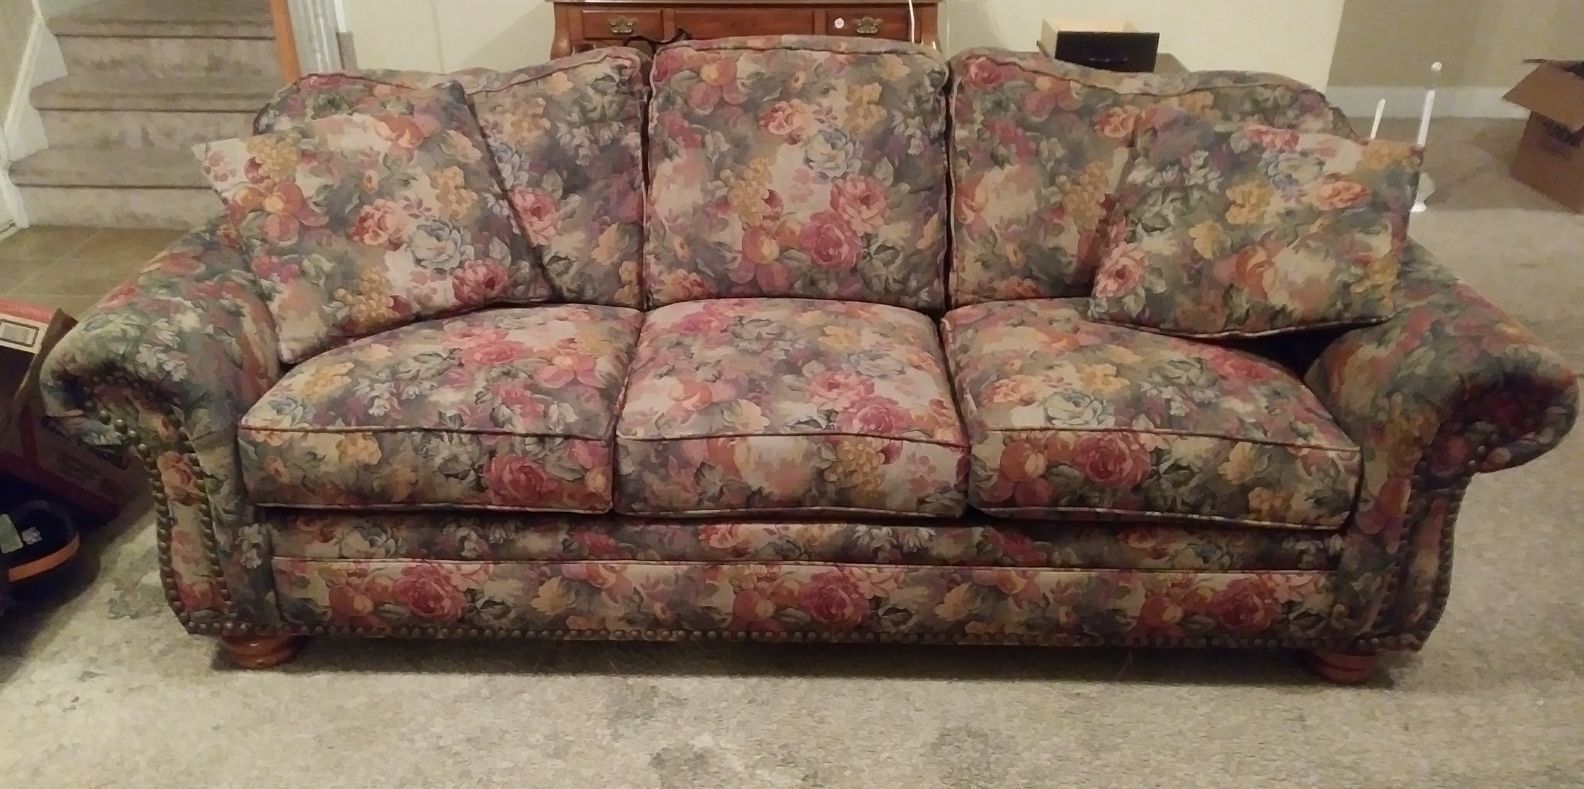 Floral couch with matching pillows